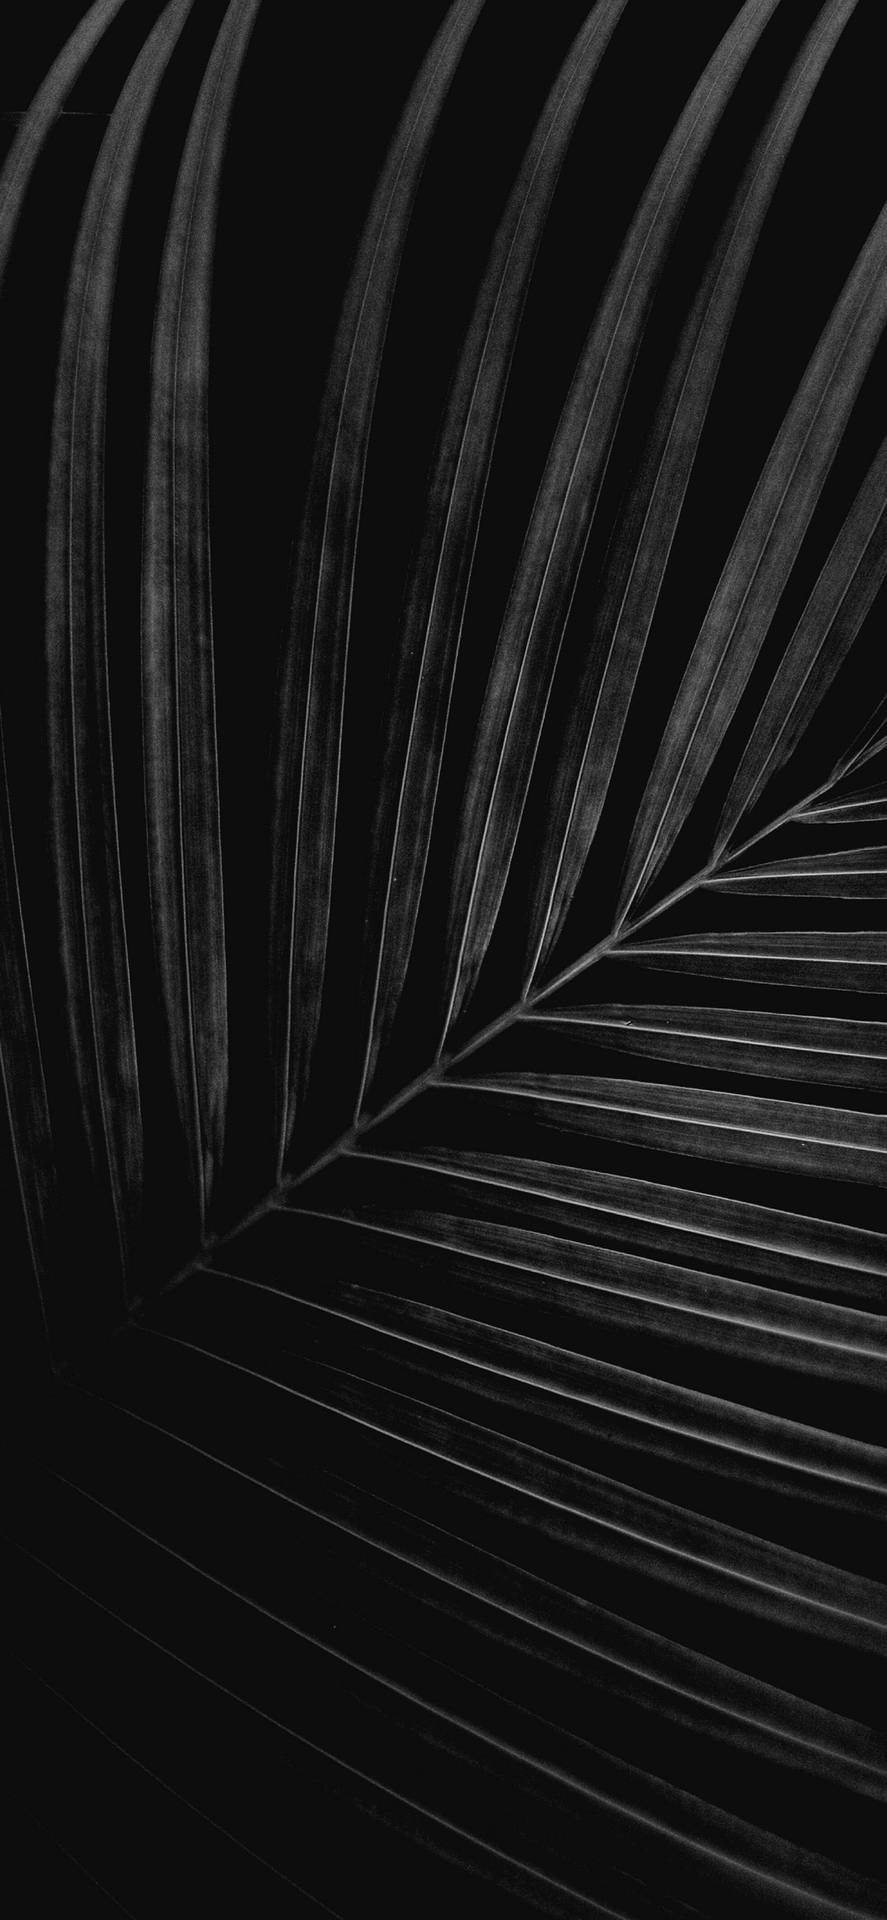 Iphone X Original Black And White Leaves Background